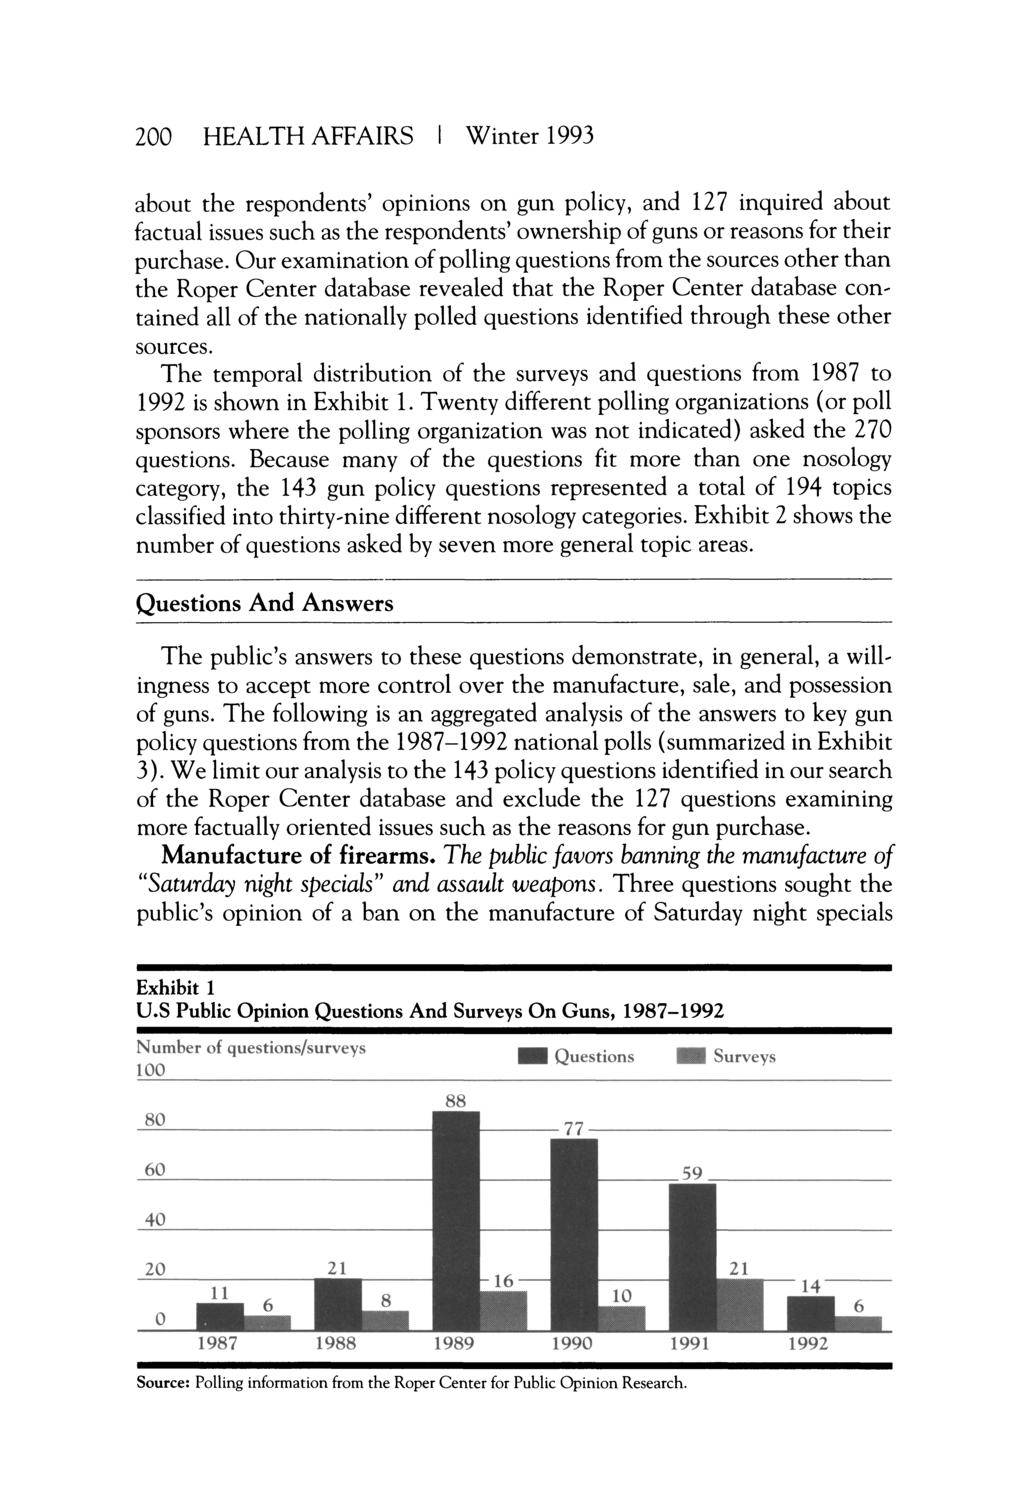 200 HEALTH AFFAIRS Winter 1993 about the respondents' opinions on gun policy, and 127 inquired about factual issues such as the respondents' ownership of guns or reasons for their purchase.